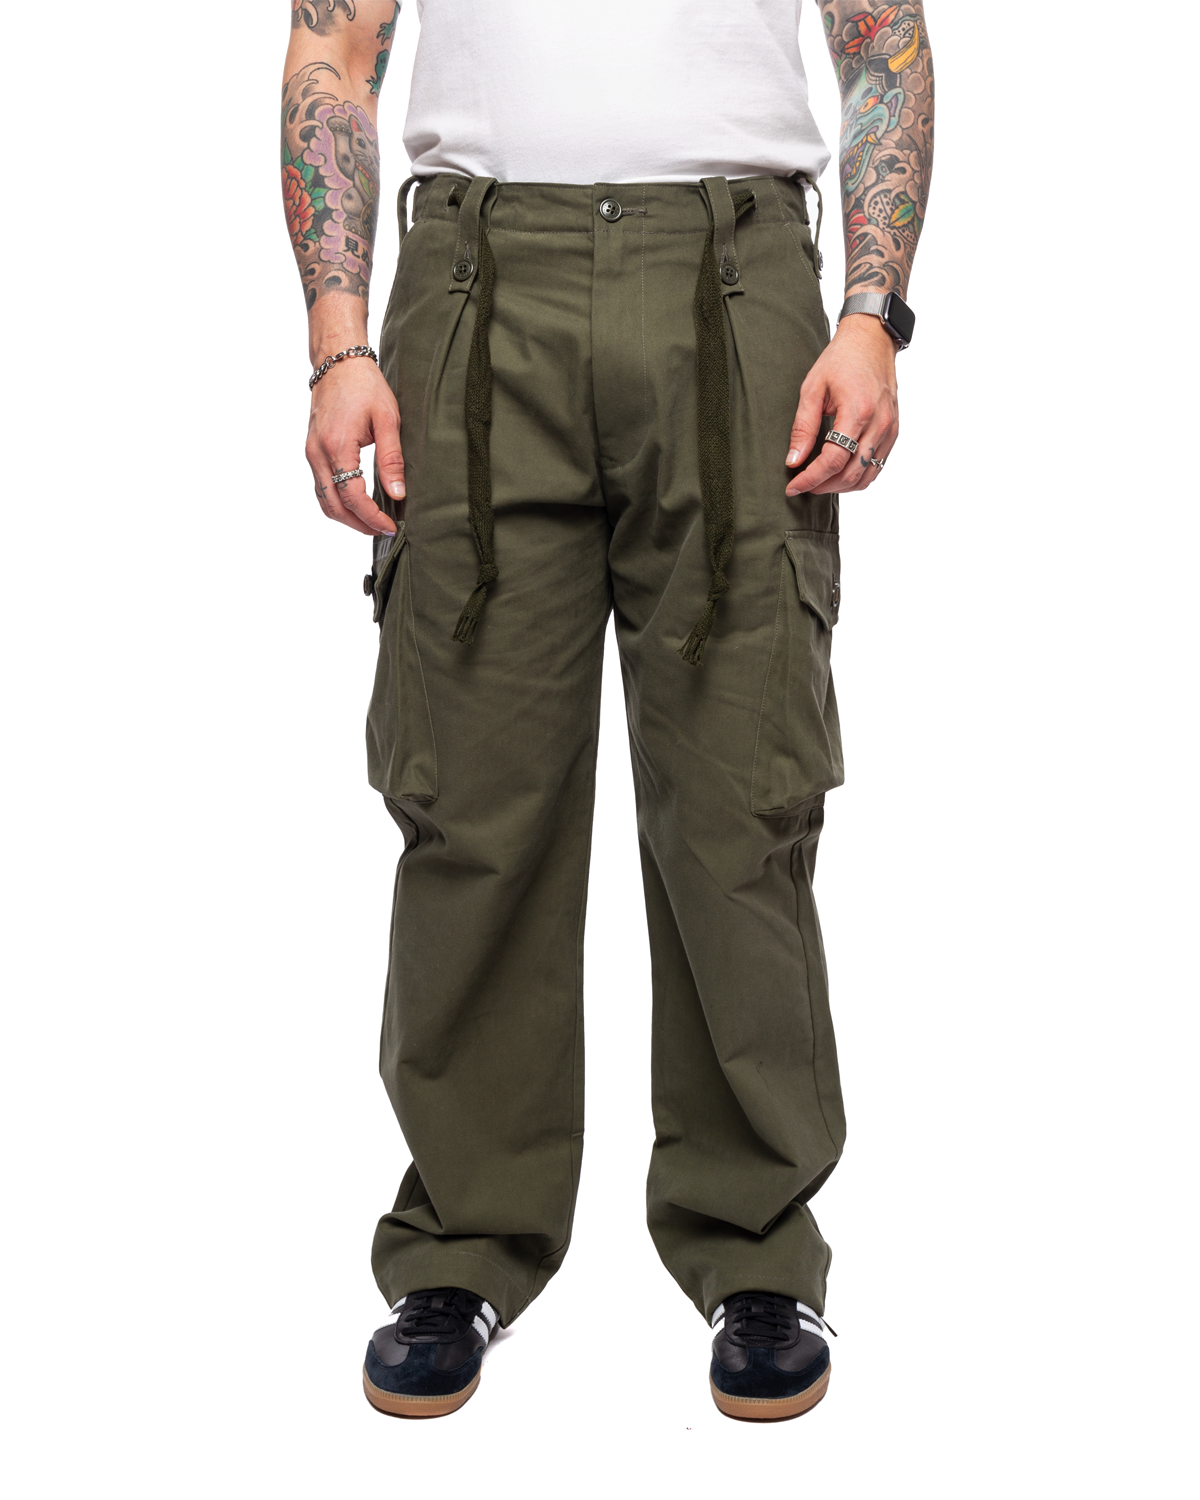 MILT2001/Trousers/Cotton. Twill Olive Drab